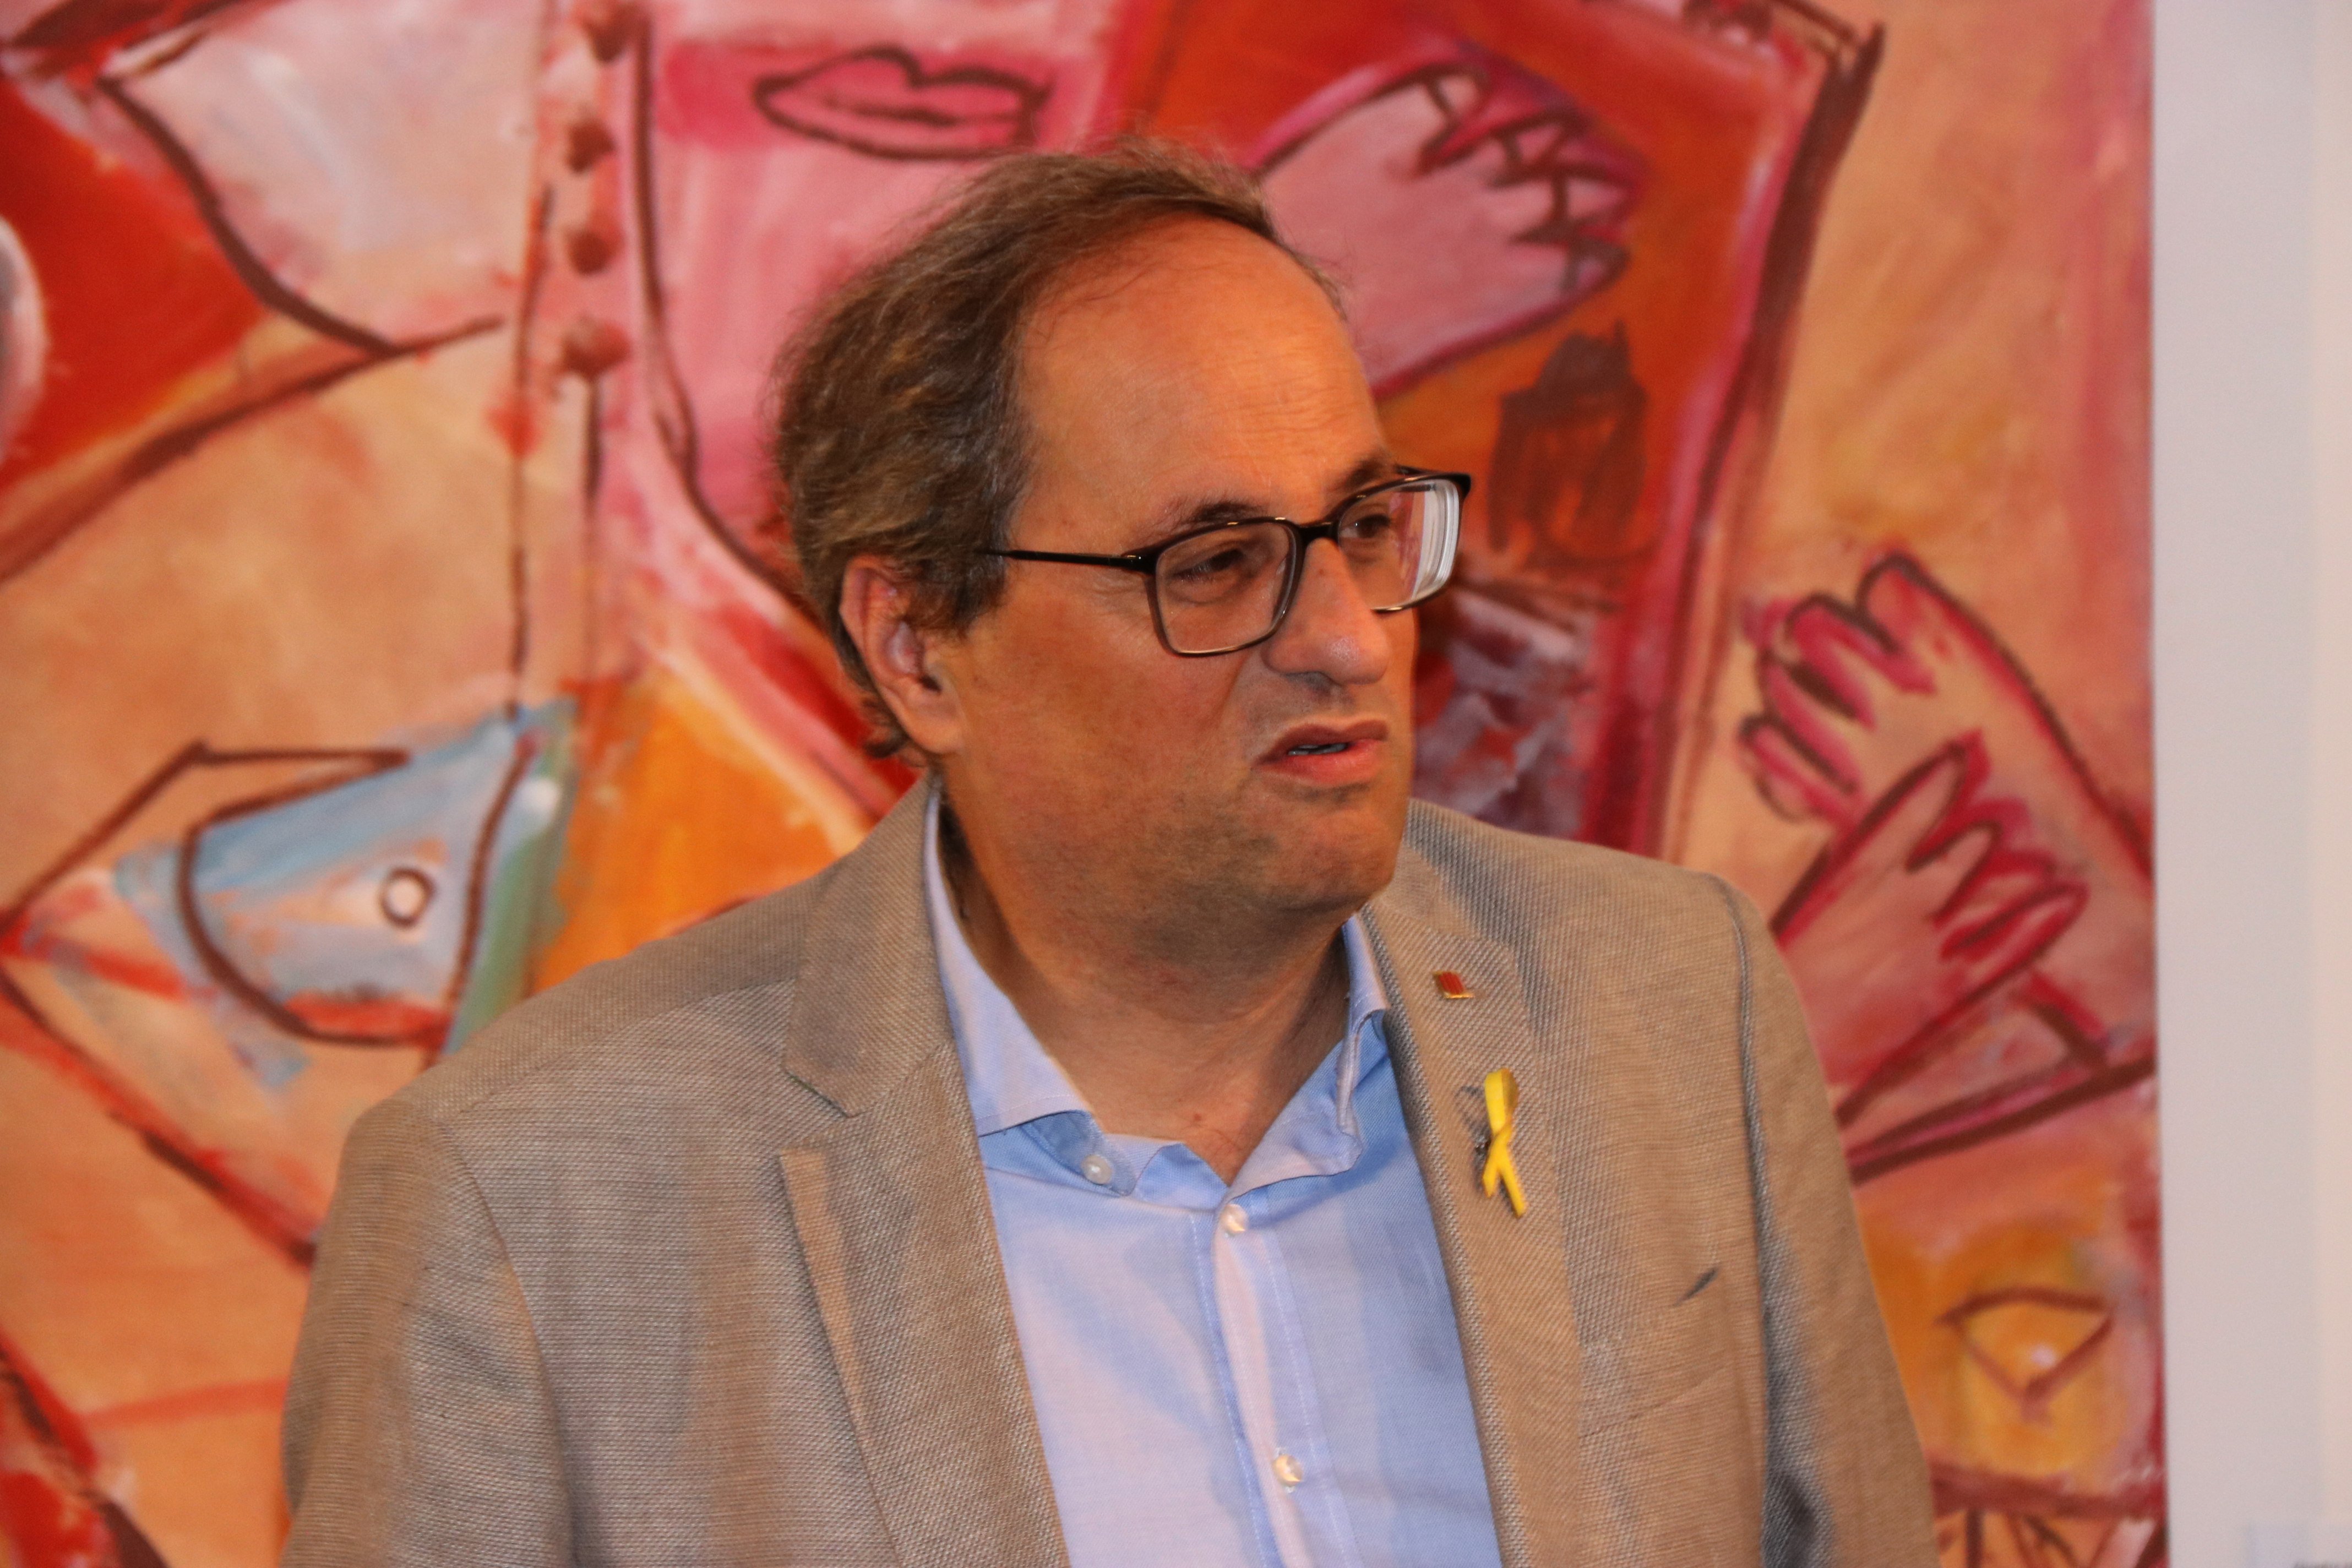 Catalan president Torra calls for civil disobedience "when necessary"